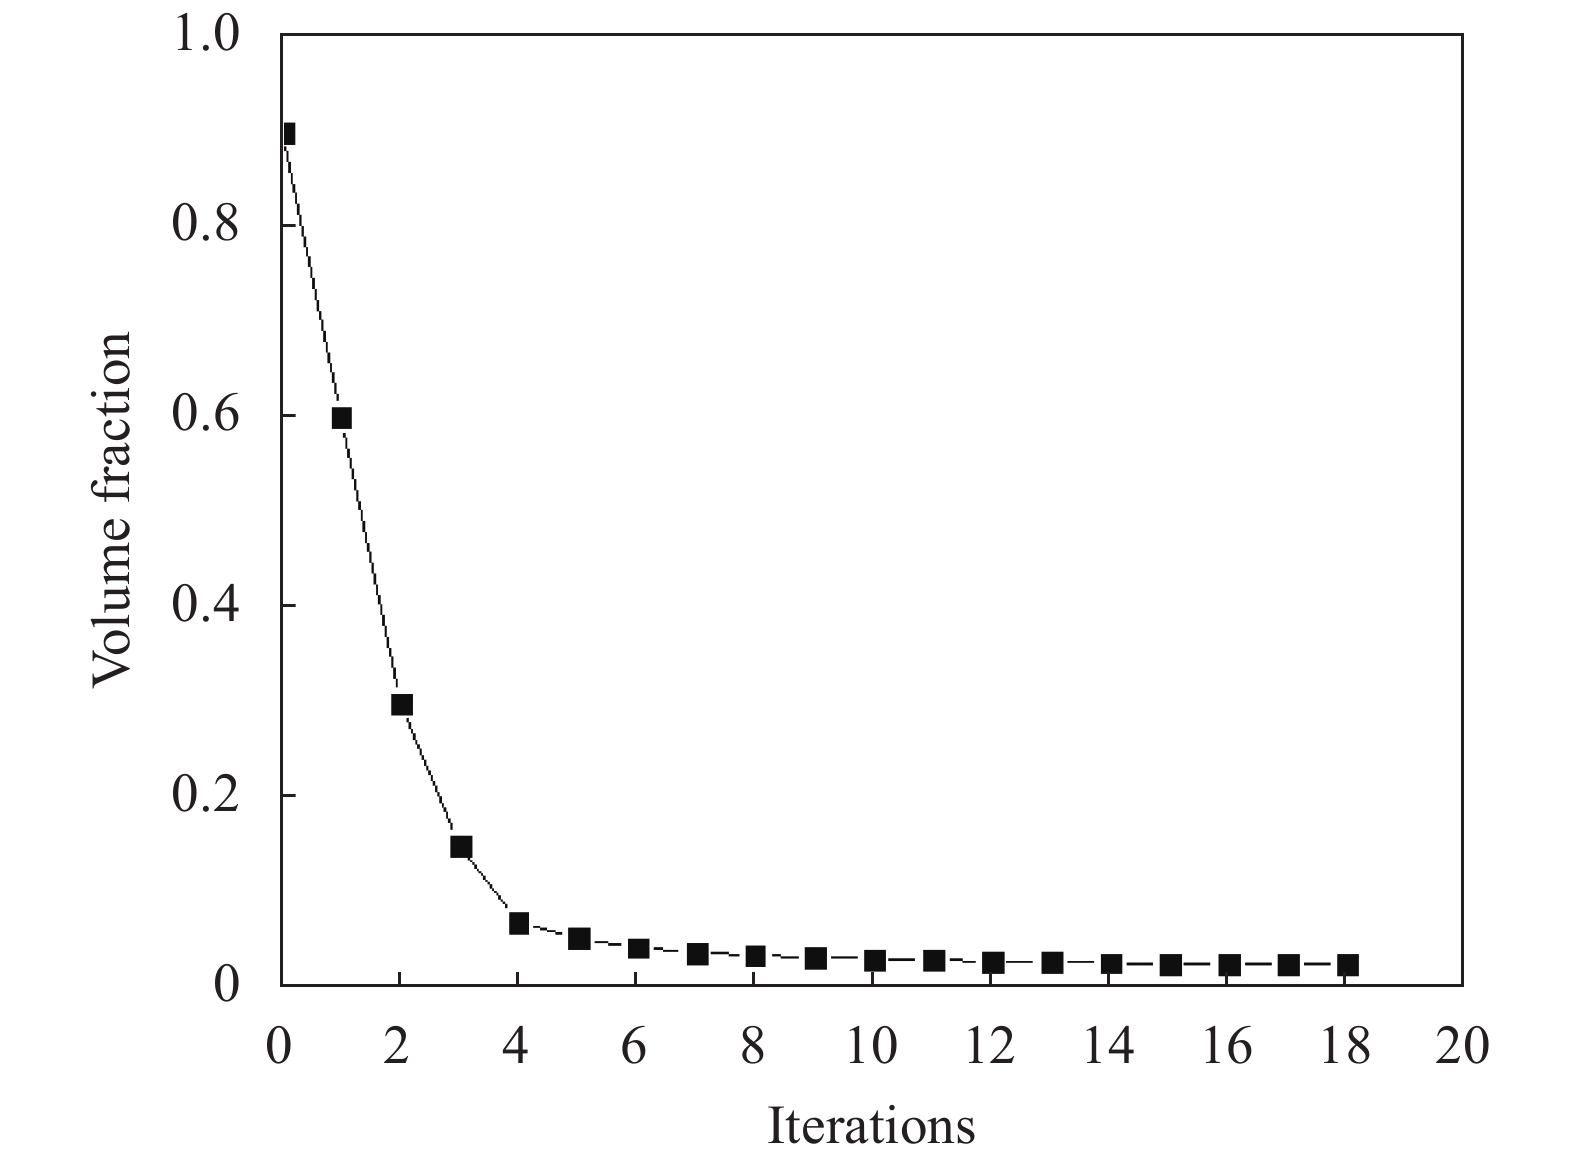 Curve of volume fraction and iterations